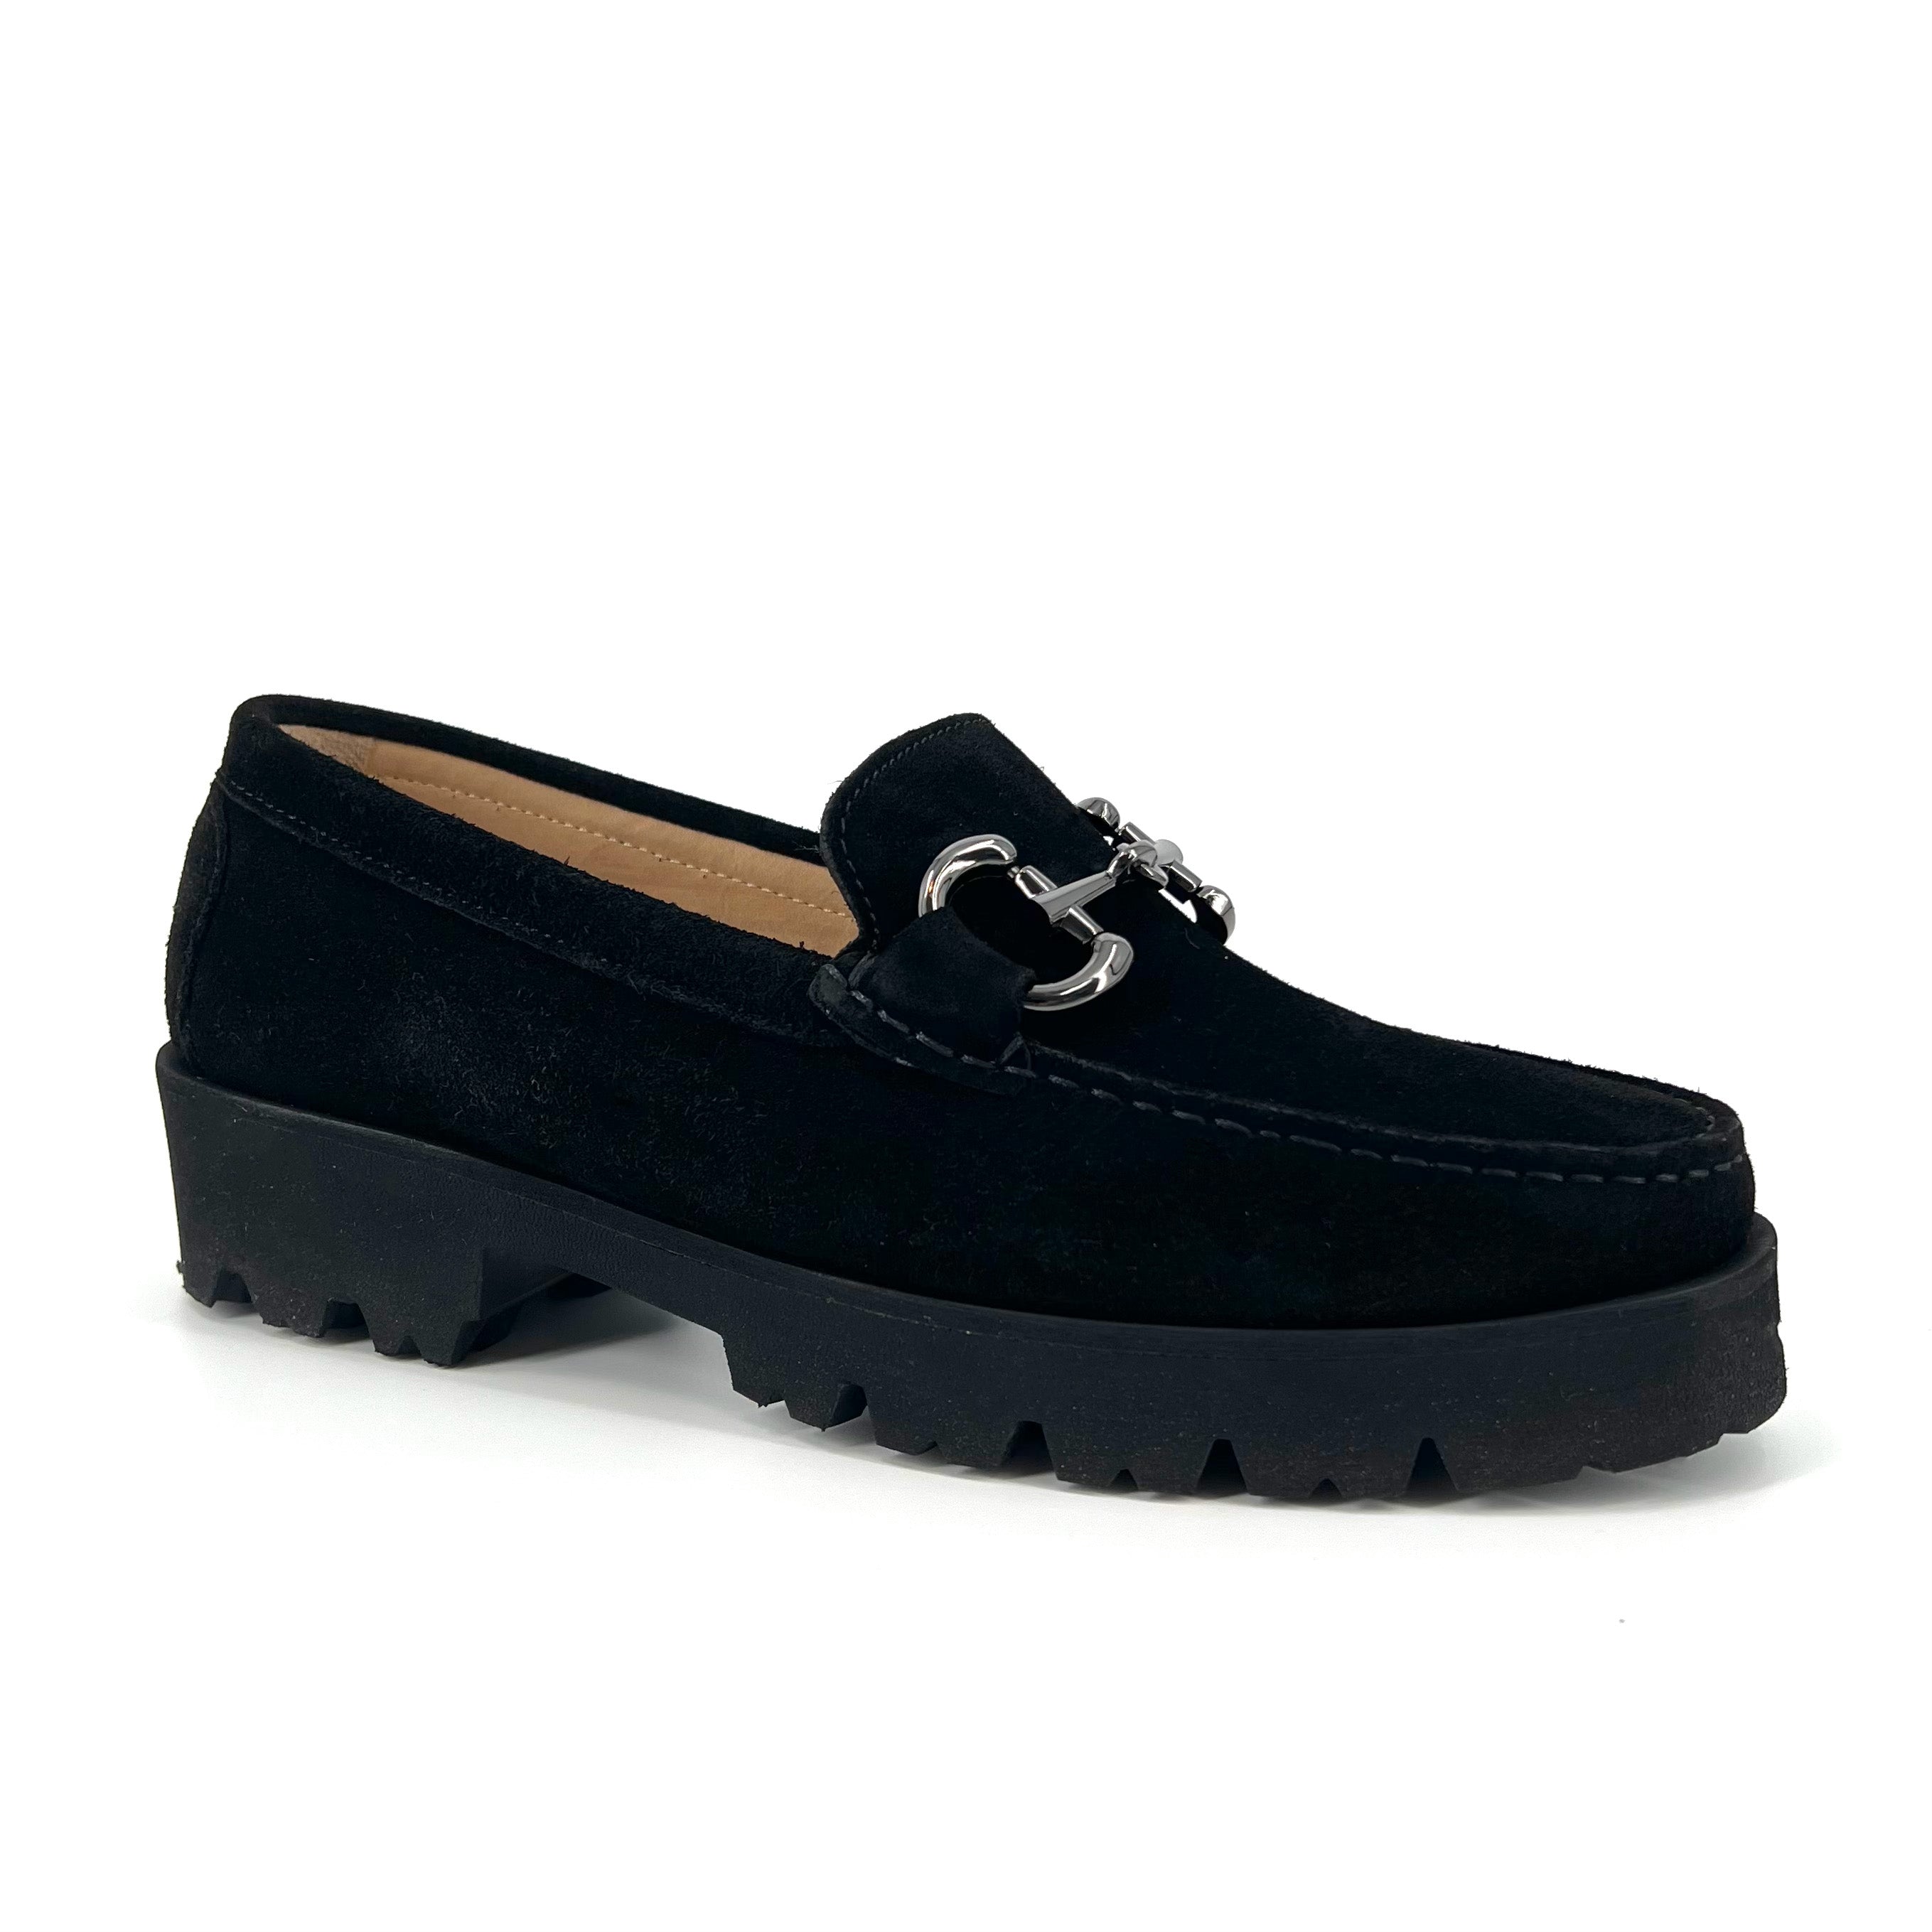 The Chunky Bit Lug Loafer in Black